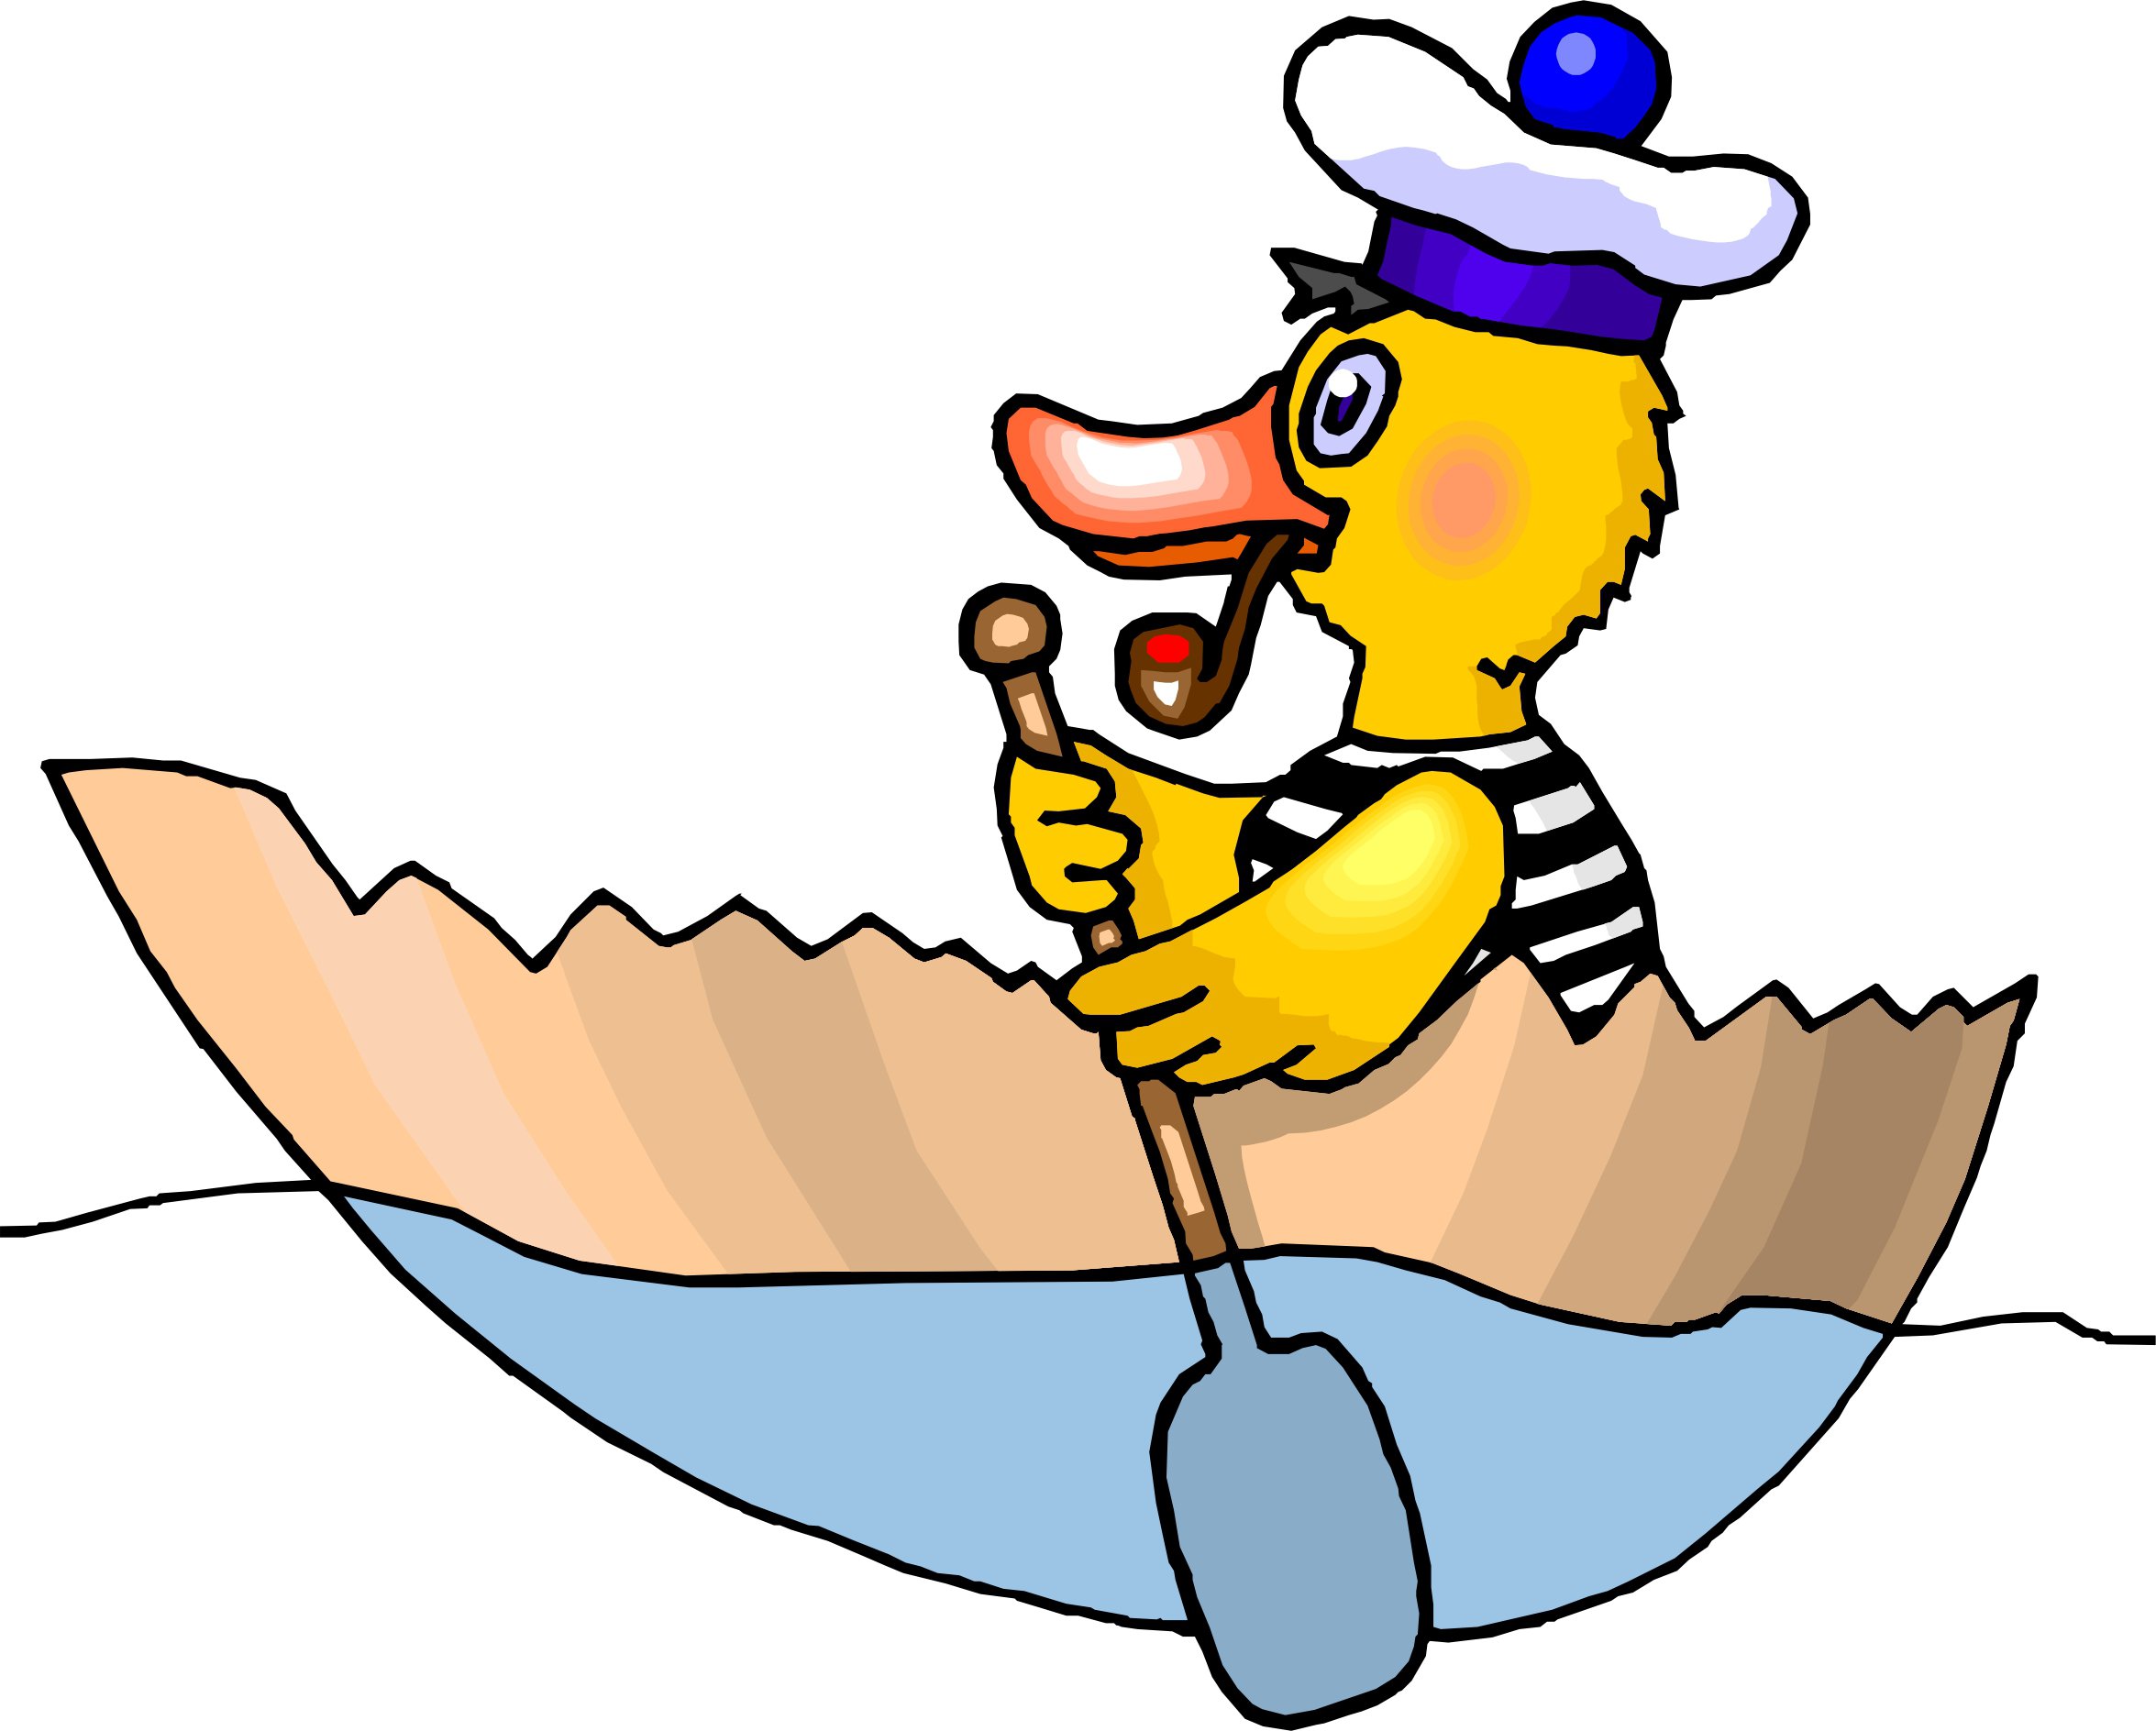 Animated row boat clipart